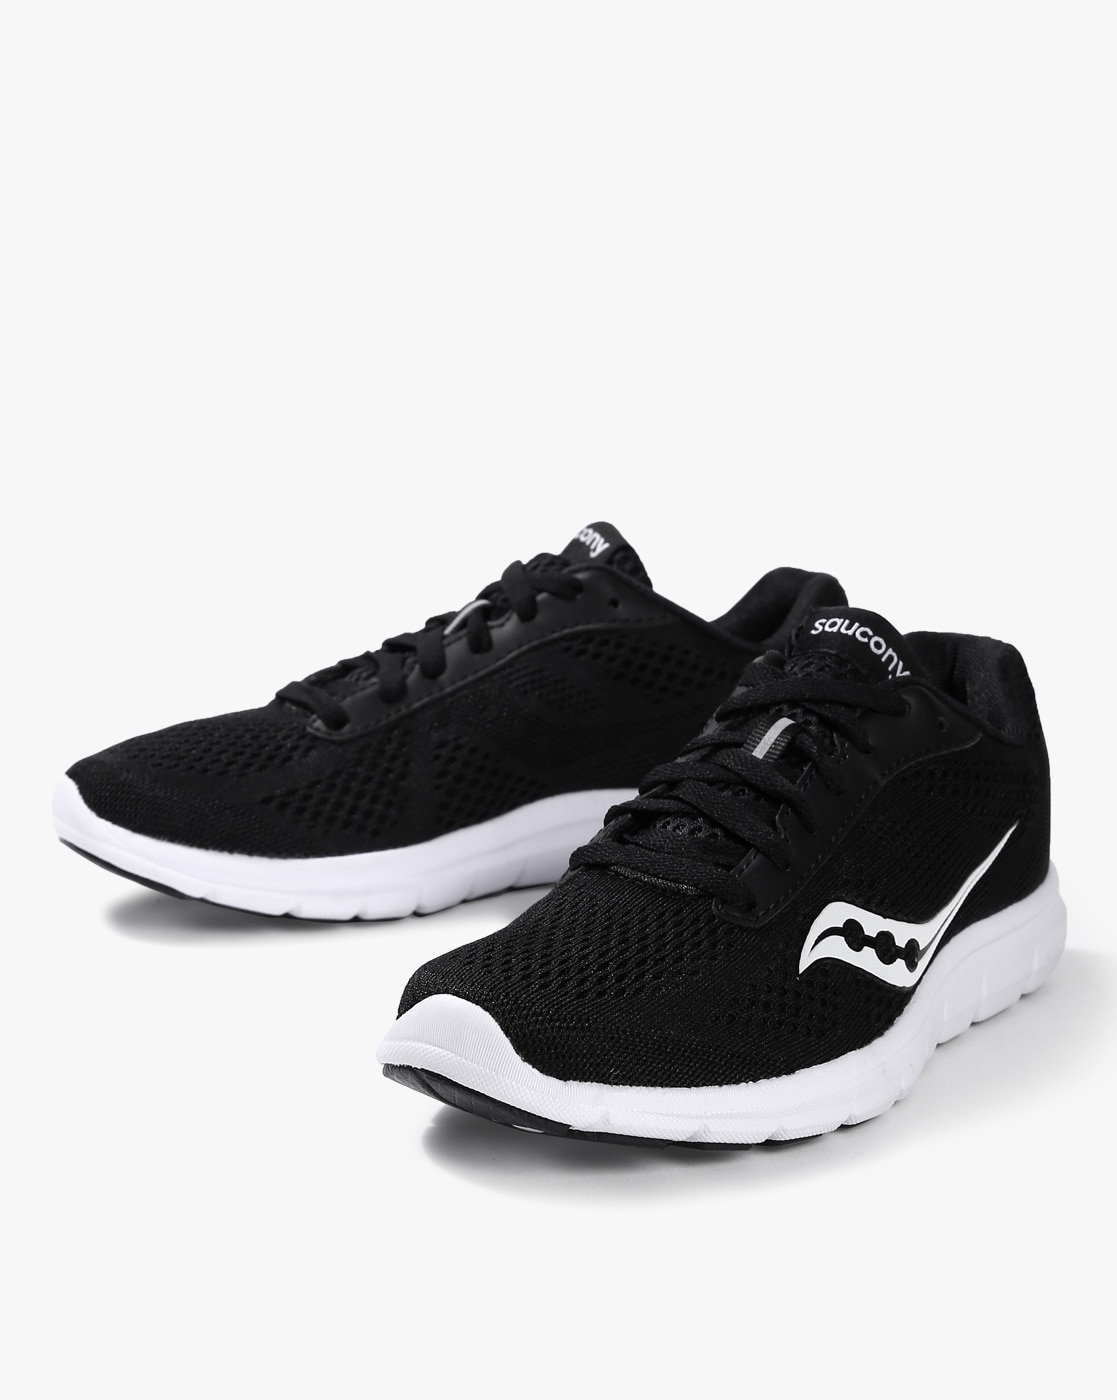 buy saucony shoes online india